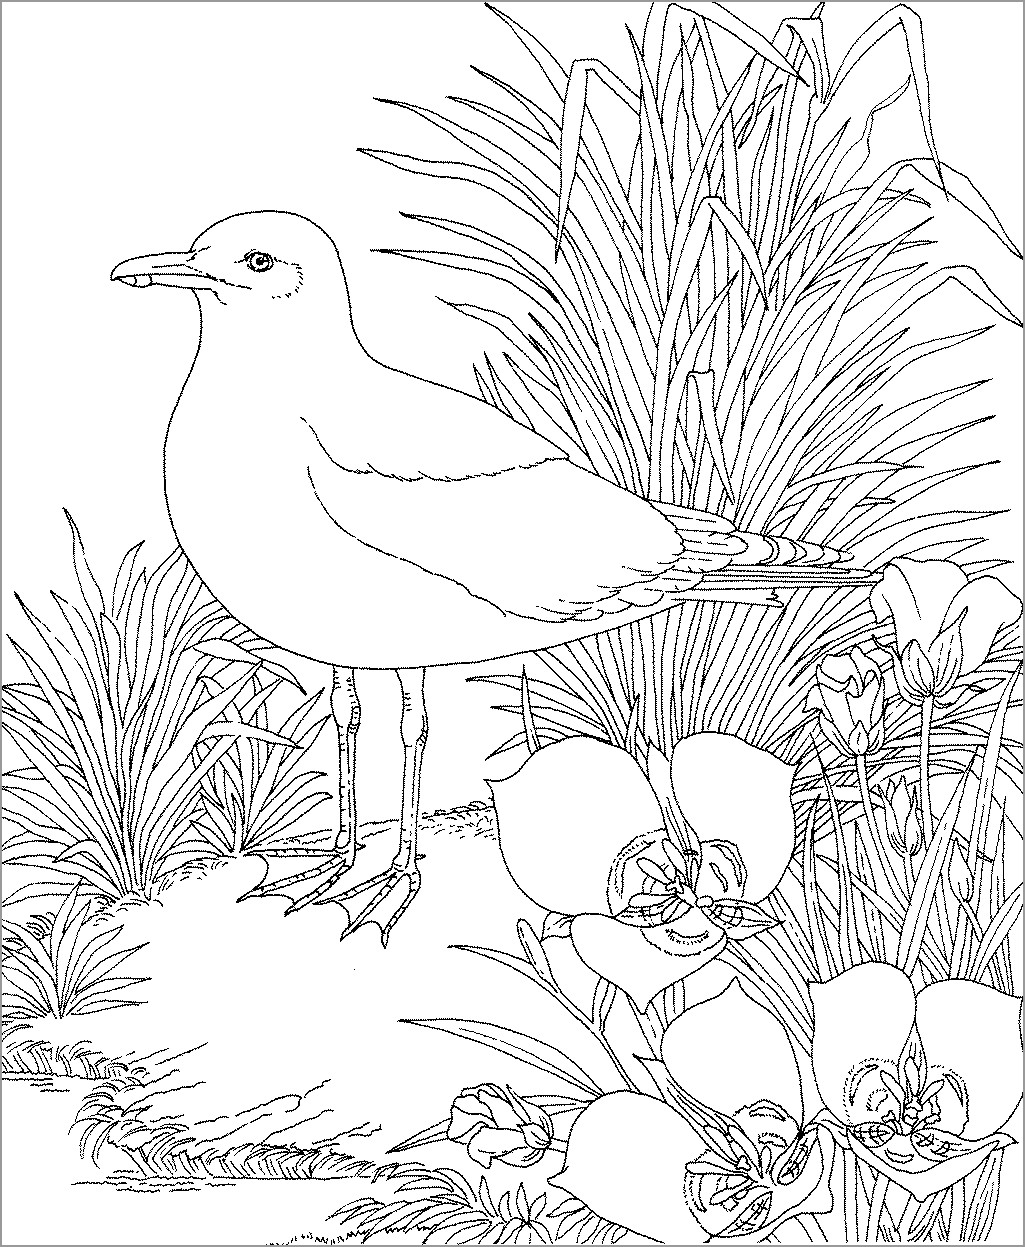 Seagulls Coloring Page for Kids